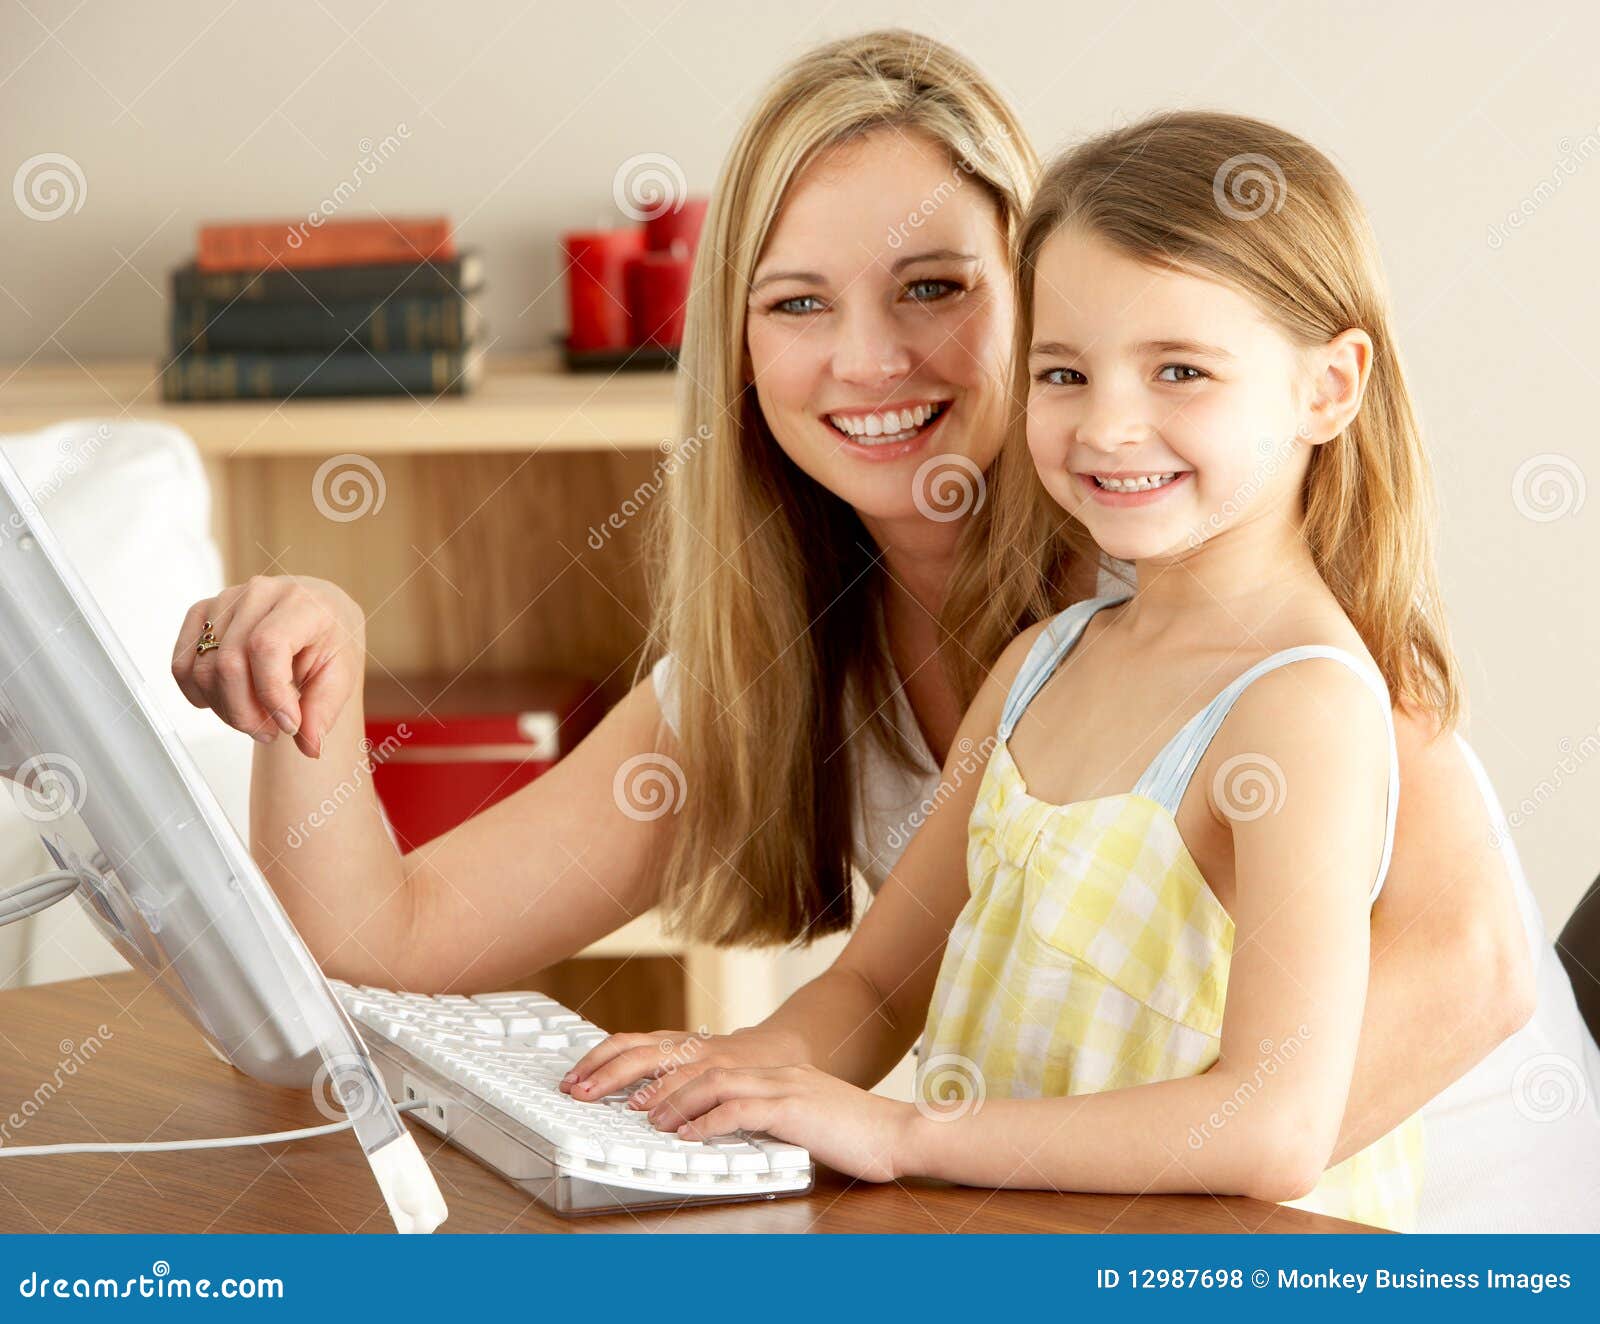 Mother And Daughter At Home Using Computer Royalty Free 